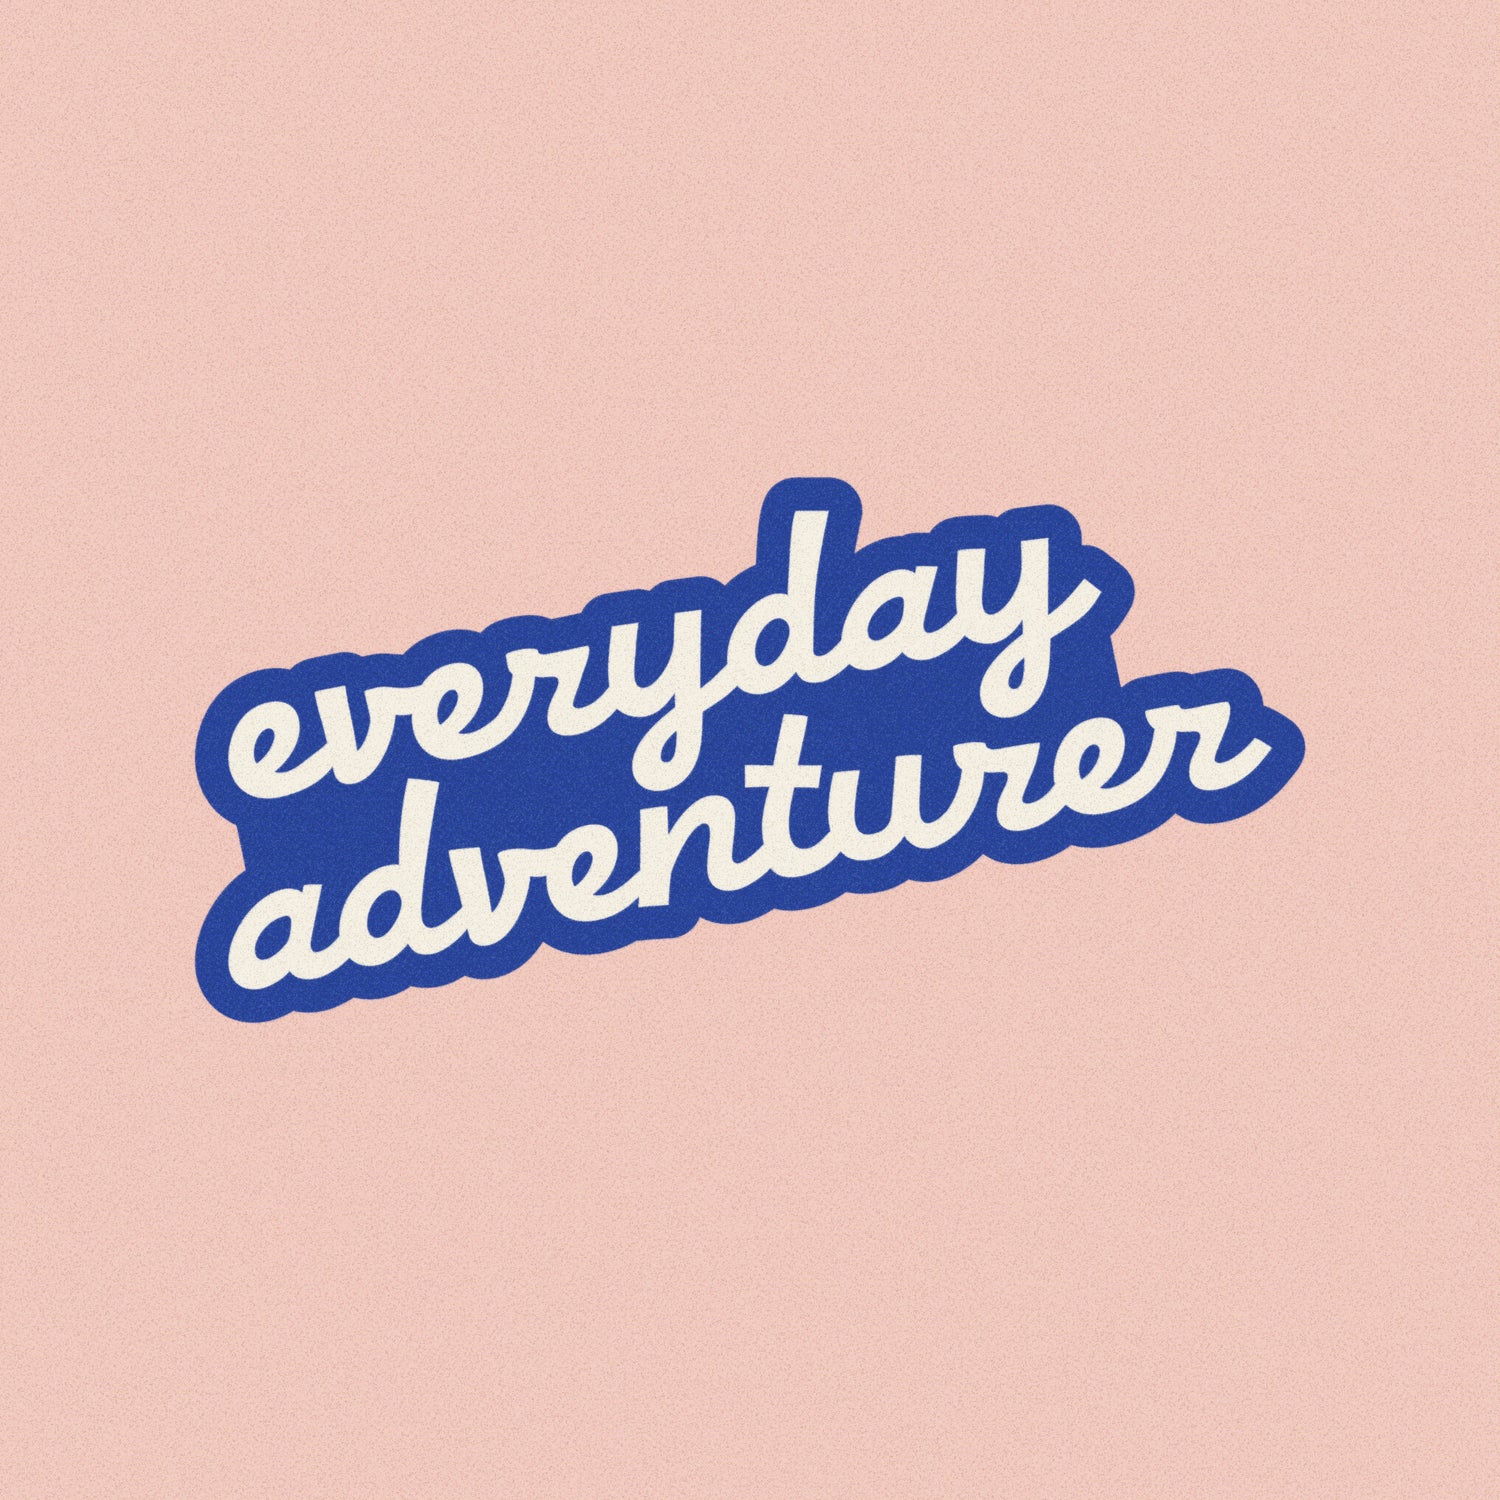 Are you an everyday adventurer?